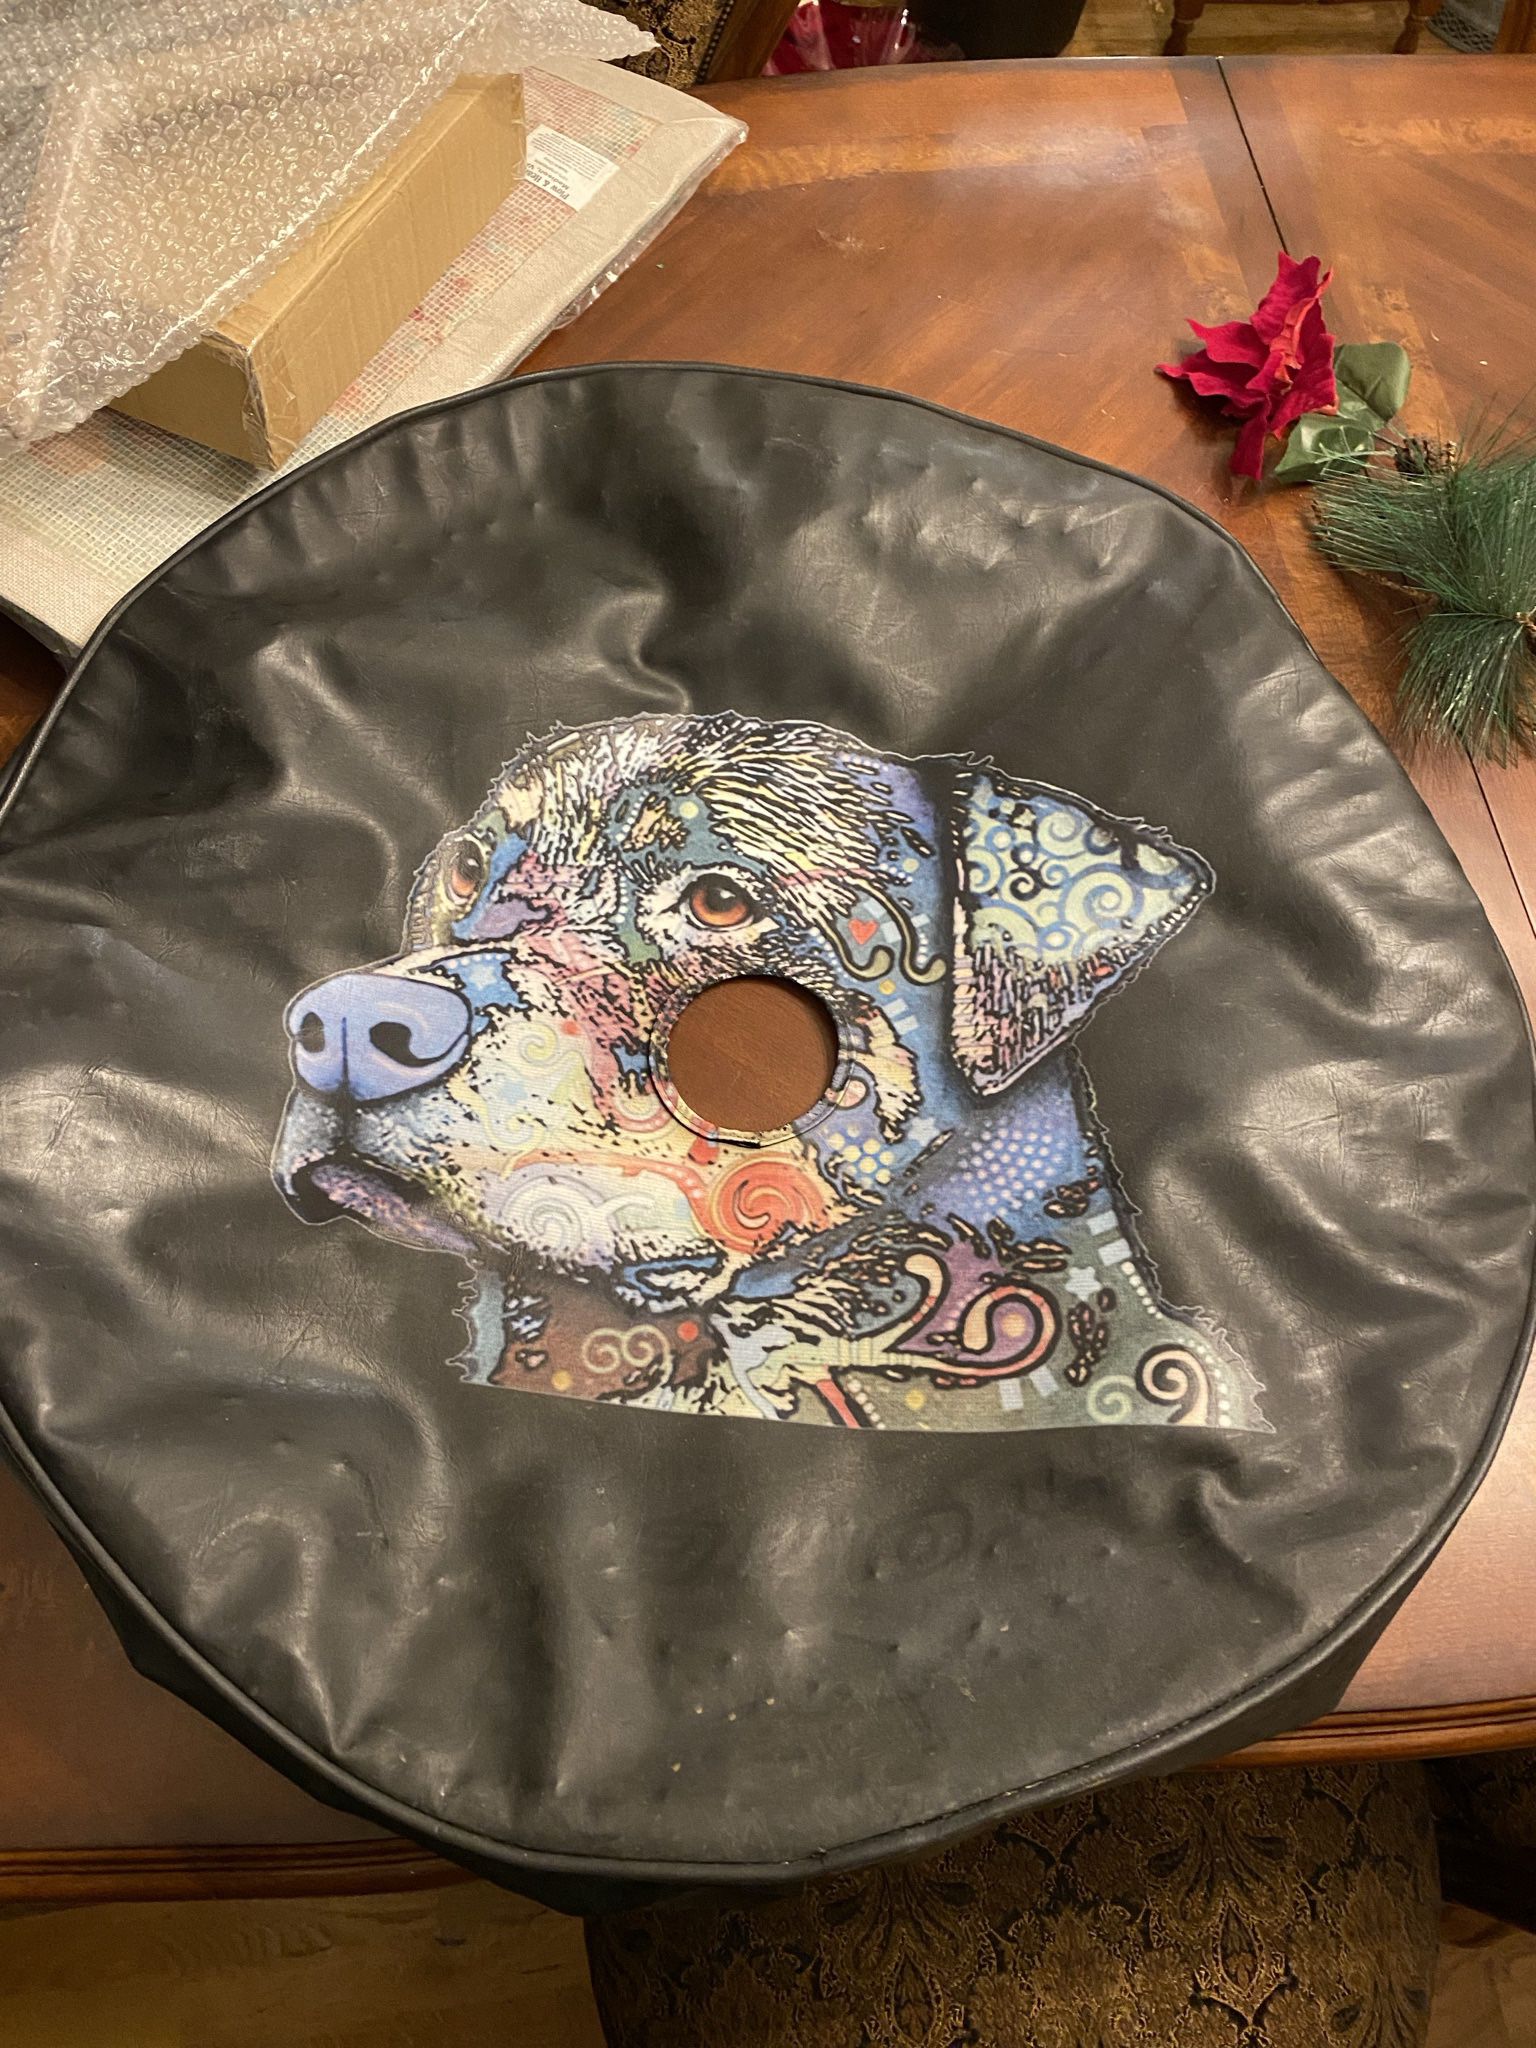 Pike Outdoors JL Series 32” Spare Tire Pitbull Staffy Cover W/ Camera Hole